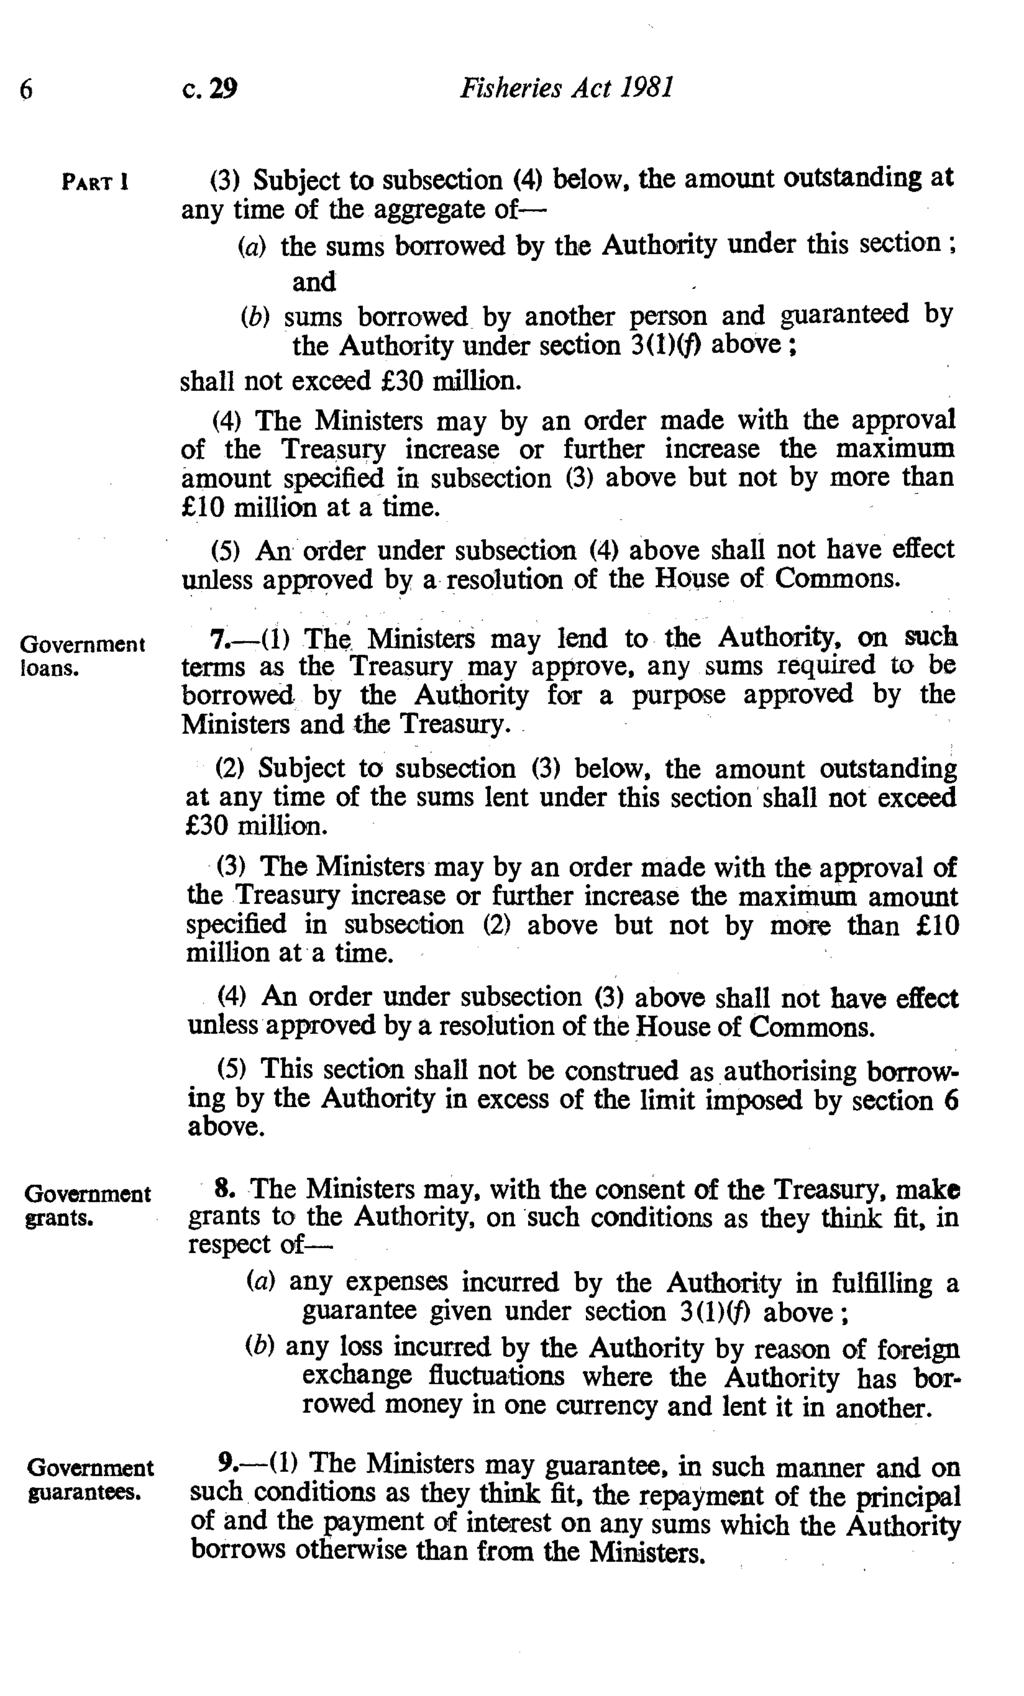 6 c. 29 Fisheries Act 1981 PART 1 Government loans. Government grants. Government guarantees.